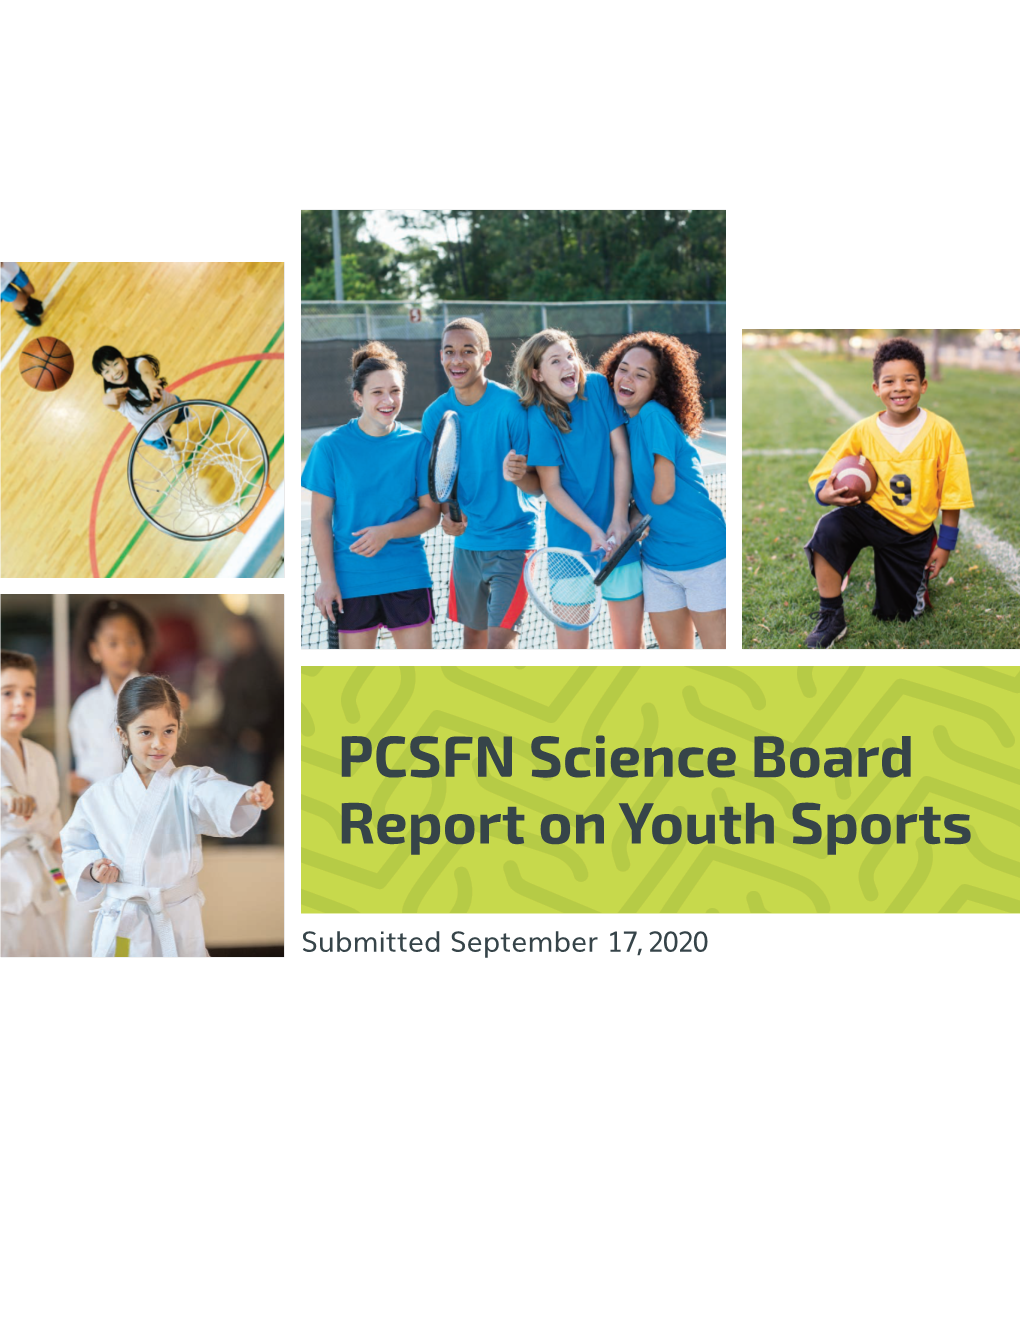 PCSFN Science Board Report on Youth Sports